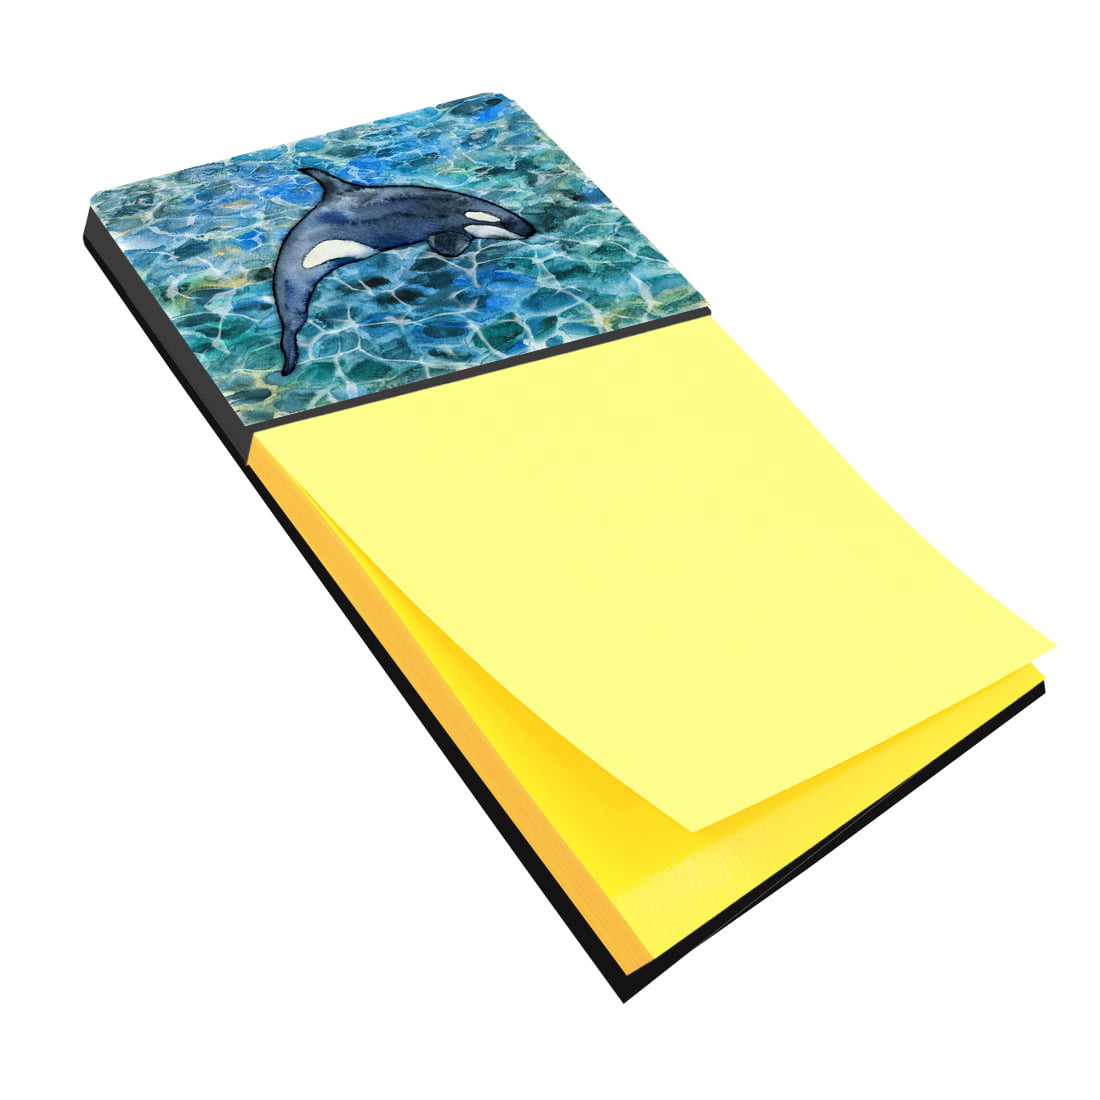 Bb5335sn Killer Whale Orca No.2 Sticky Note Holder